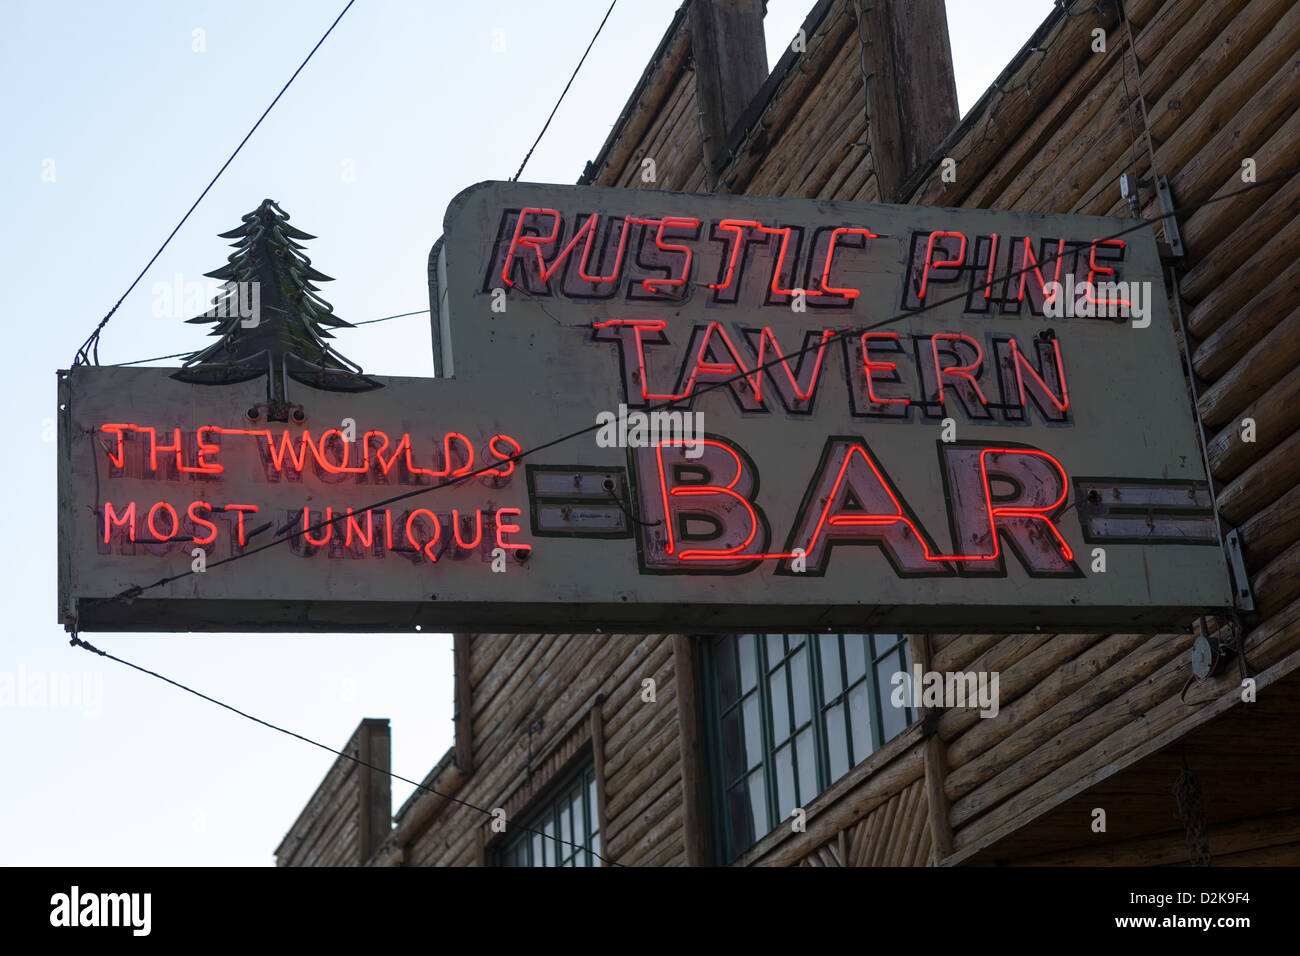 Rustic tavern with red neon sign, suggesting that is the worlds most unique bar Stock Photo